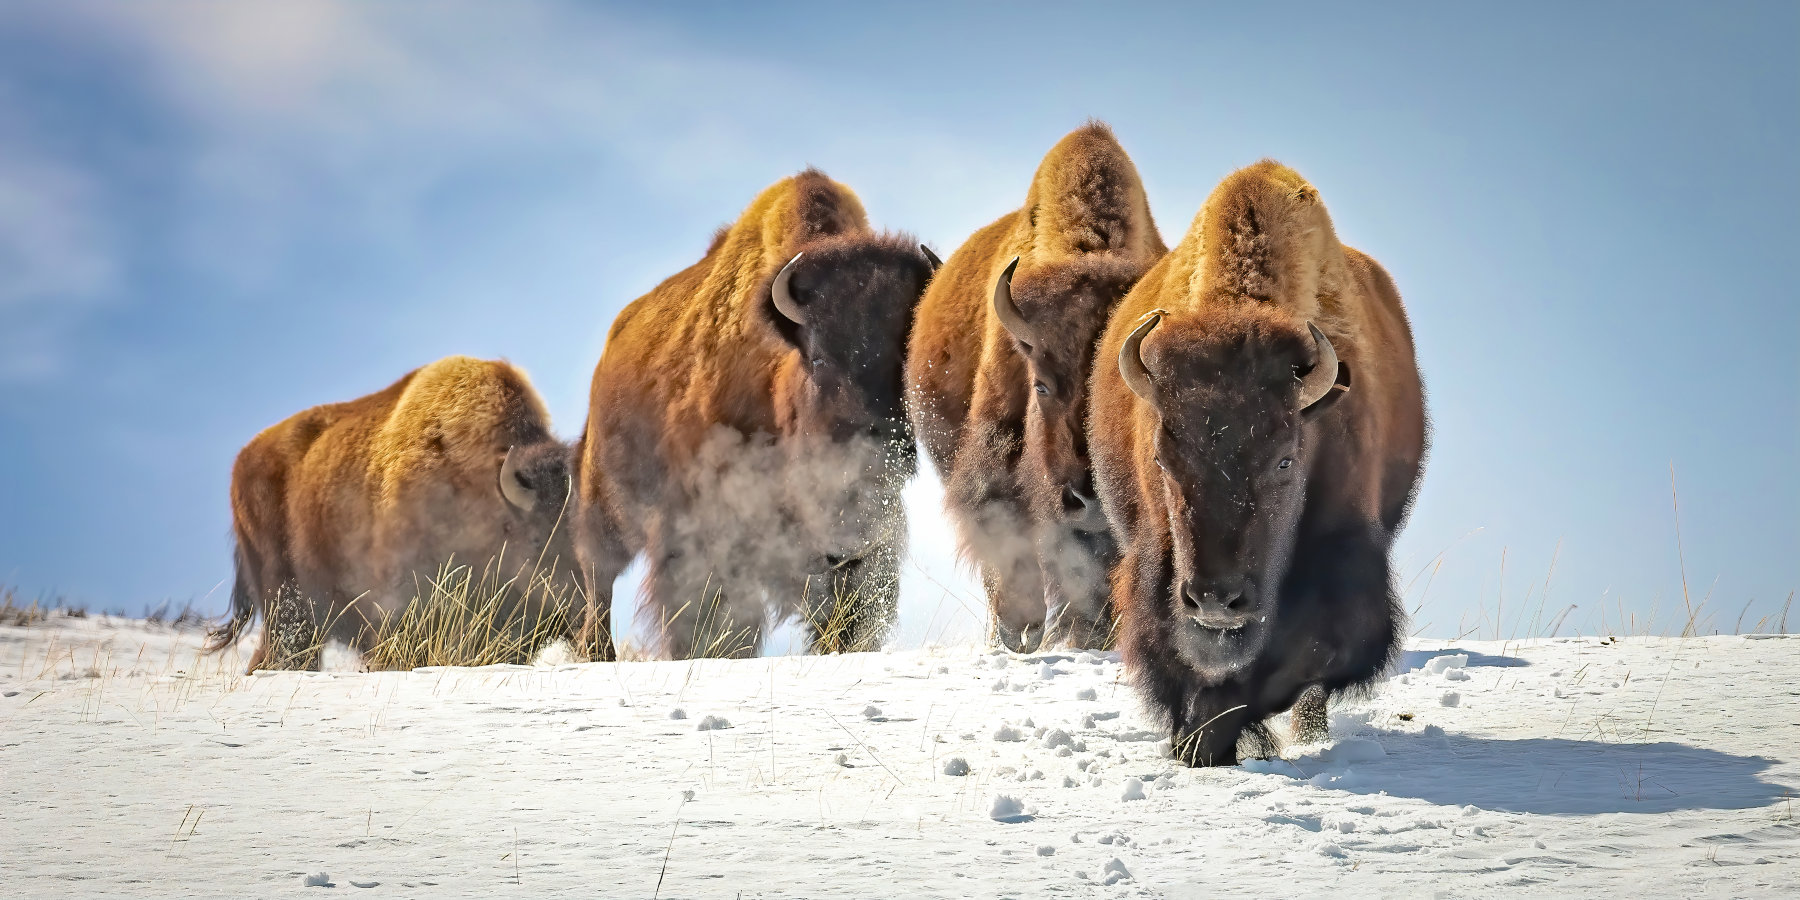 Herd of bison in Yellowstone National Park